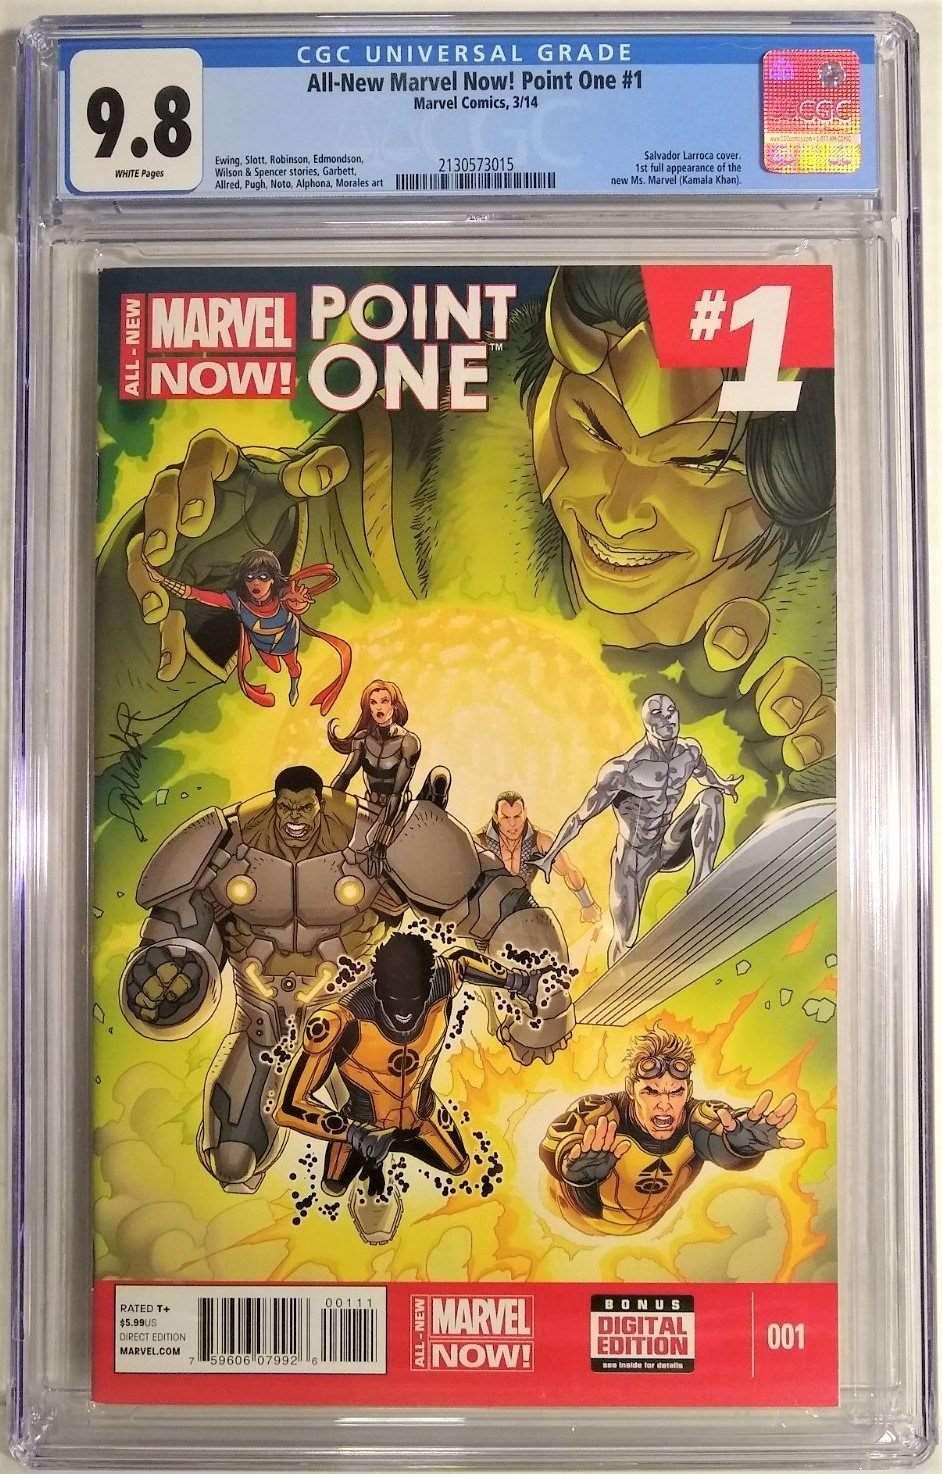 ALL NEW MARVEL NOW! POINT ONE #1 CGC 9.8